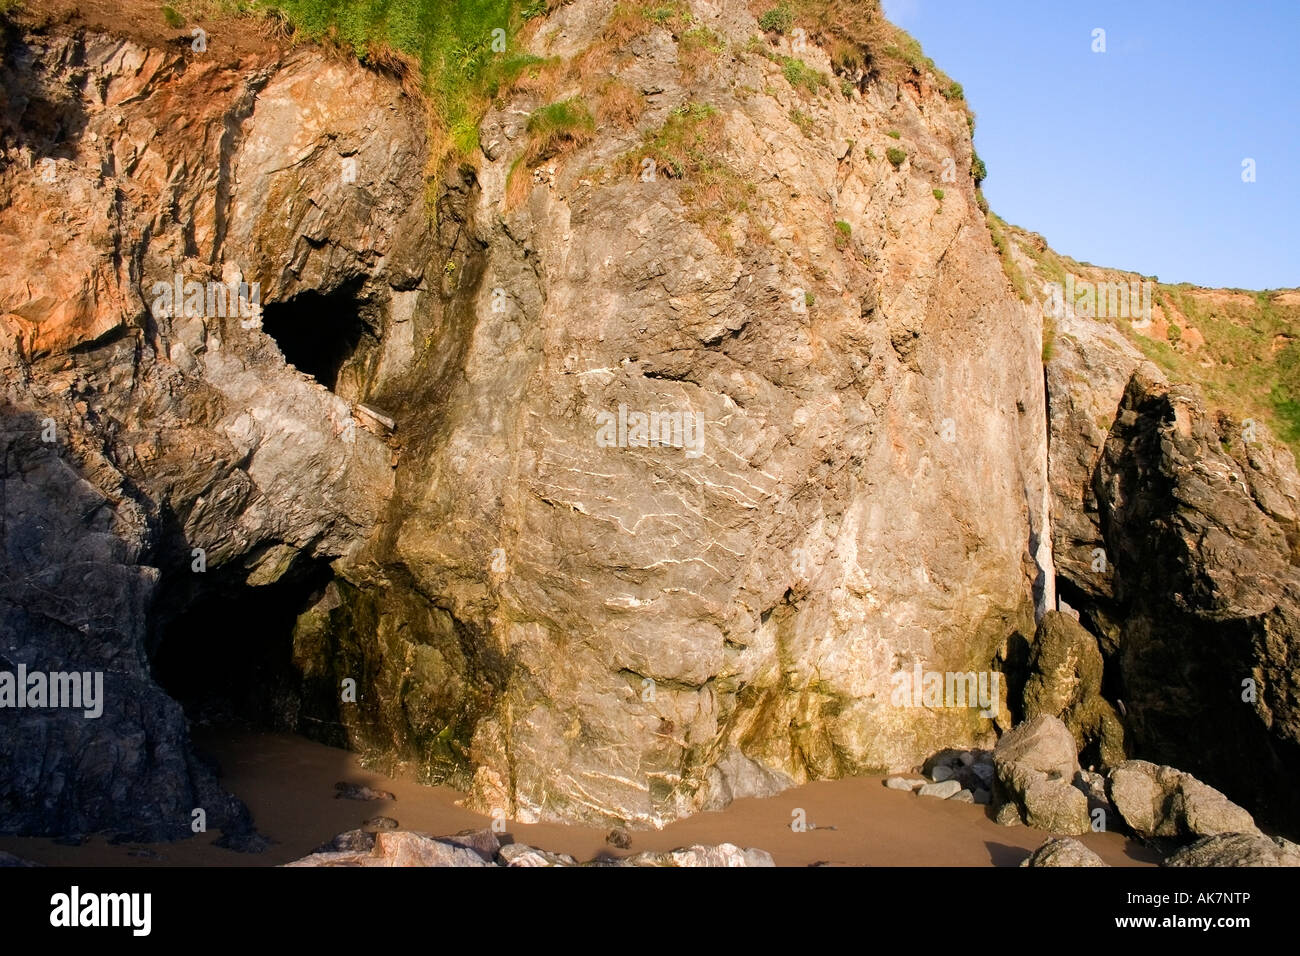 Unsystematisch Stollen in Felsen, Lady's Cove, Copper Coast, Co Waterford, Irland Stockfoto